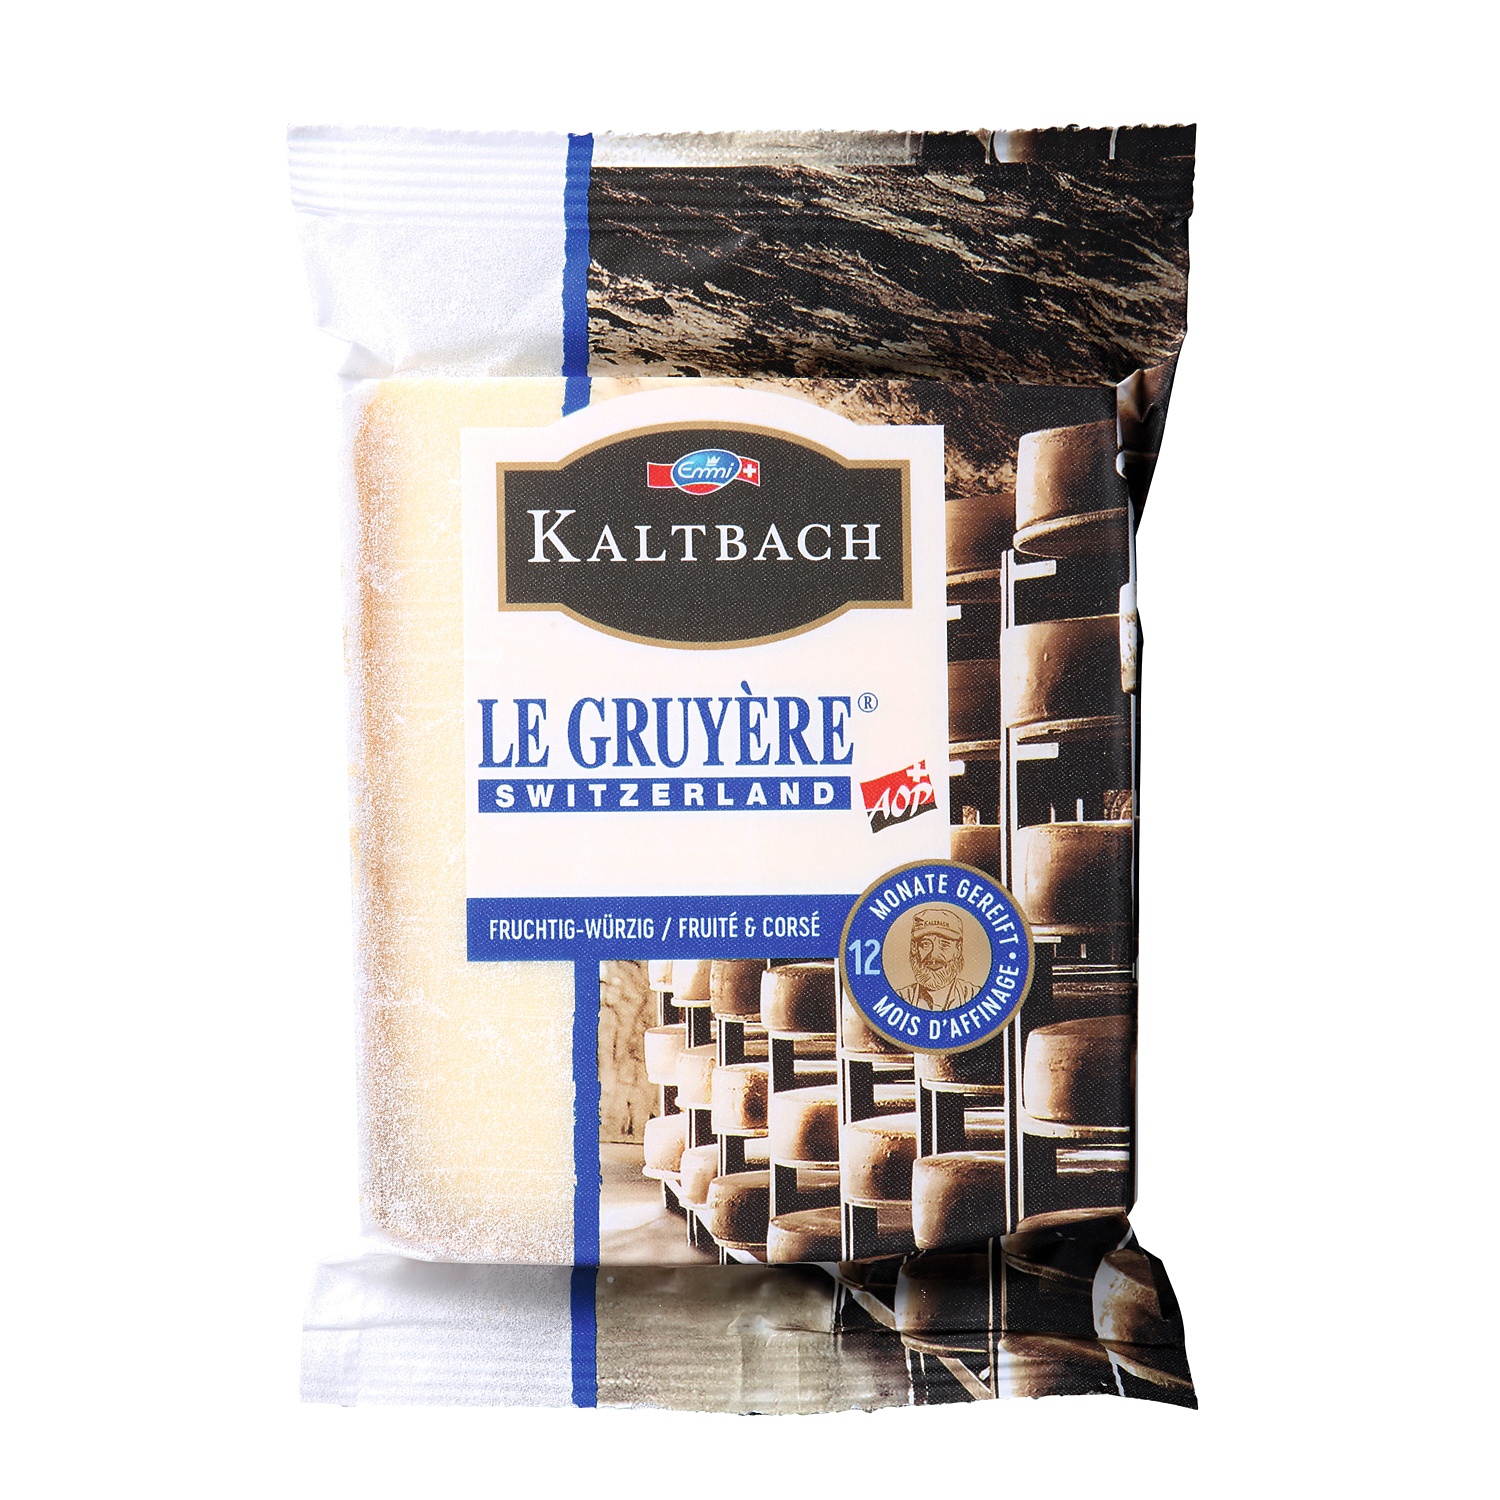 KALTBACH Fromage Emmi, Gruyère